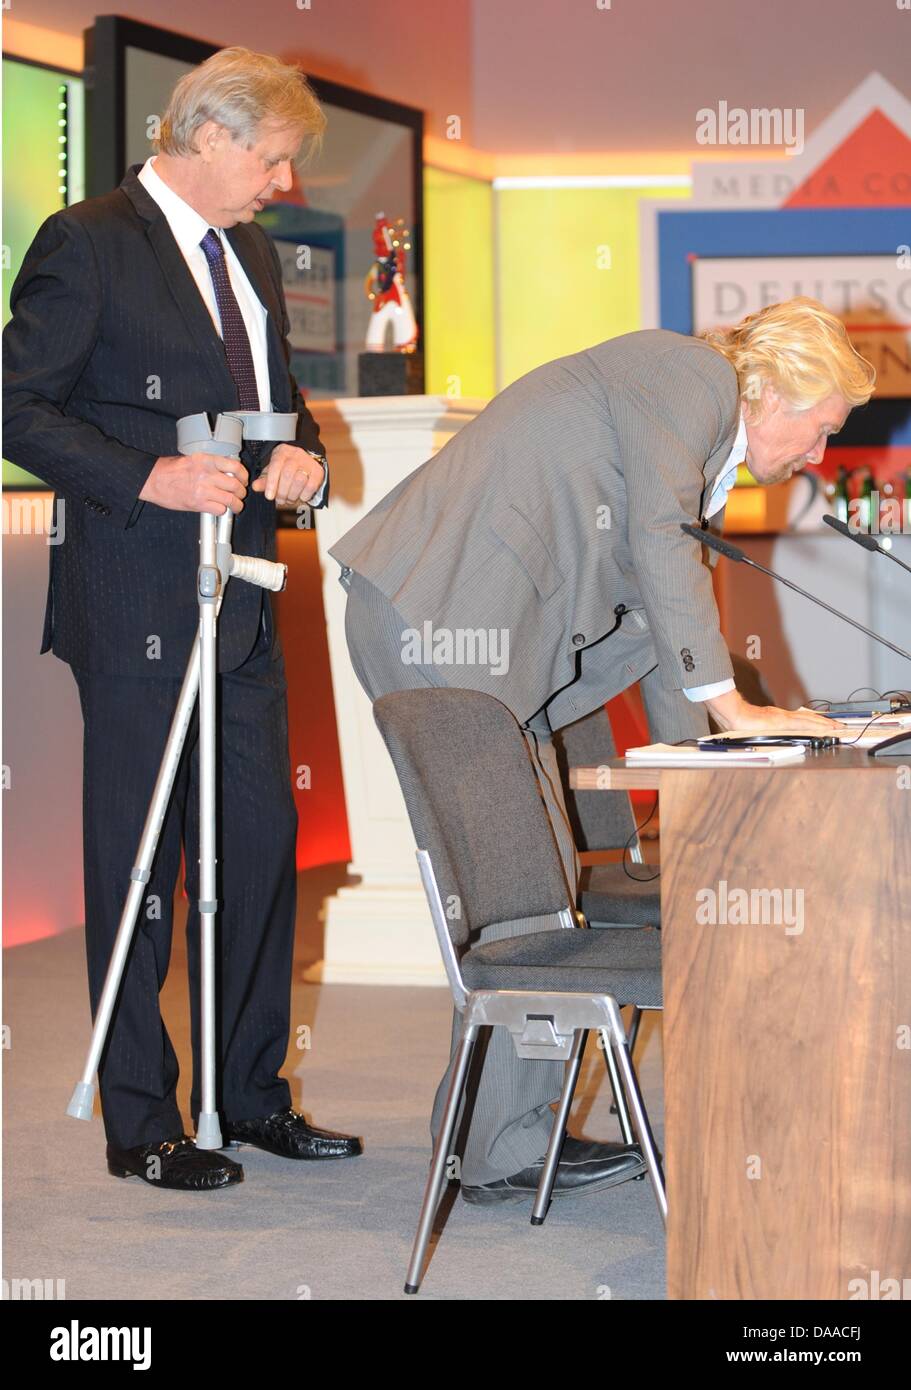 British enterpriser and billionaire Richard Branson (r)arrives for the award ceremony of the German Media Prize 2010 together with Karlheinz Koegel (l)at the Congress Center of Baden Baden, Germany, 24 January 2011. Despite his cruciate ligament rupture, he showed up on crutches to receive his prize. Since 1992, the German Media Prize is awarded to a public figure, who has, accordi Stock Photo